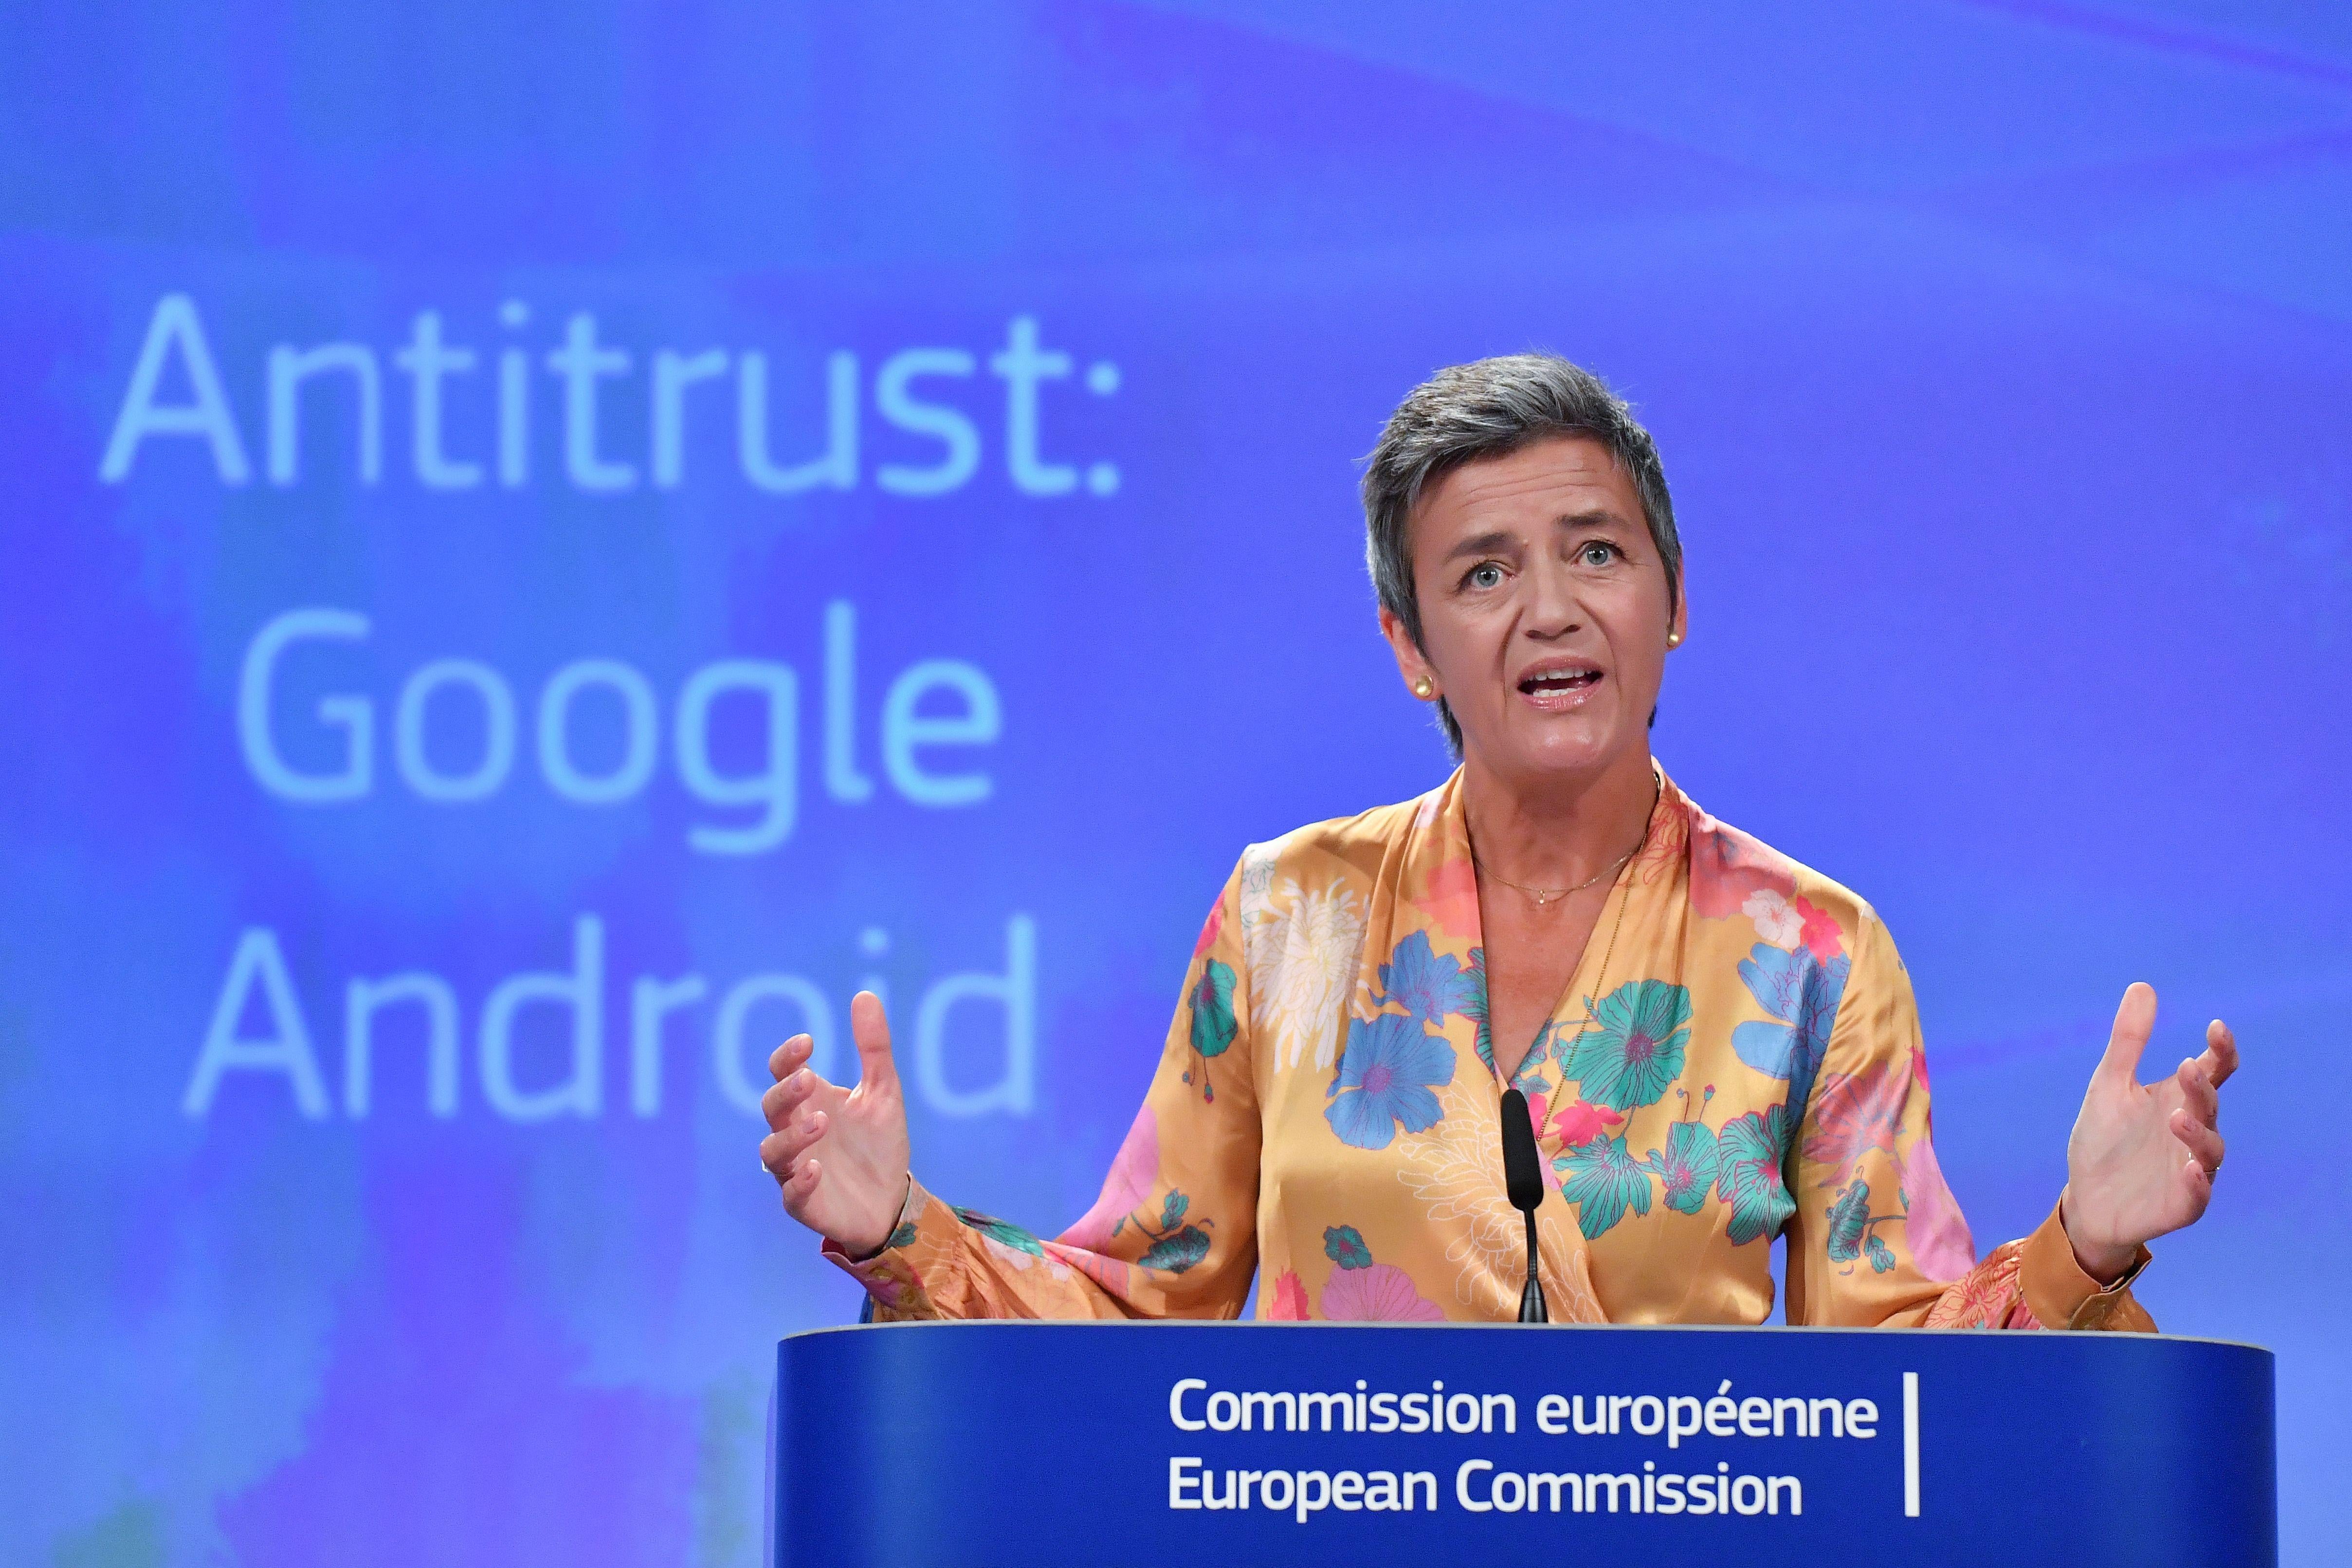 Margrethe Vestager stands at a podium with the words "Antitrust: Google Android" behind her.